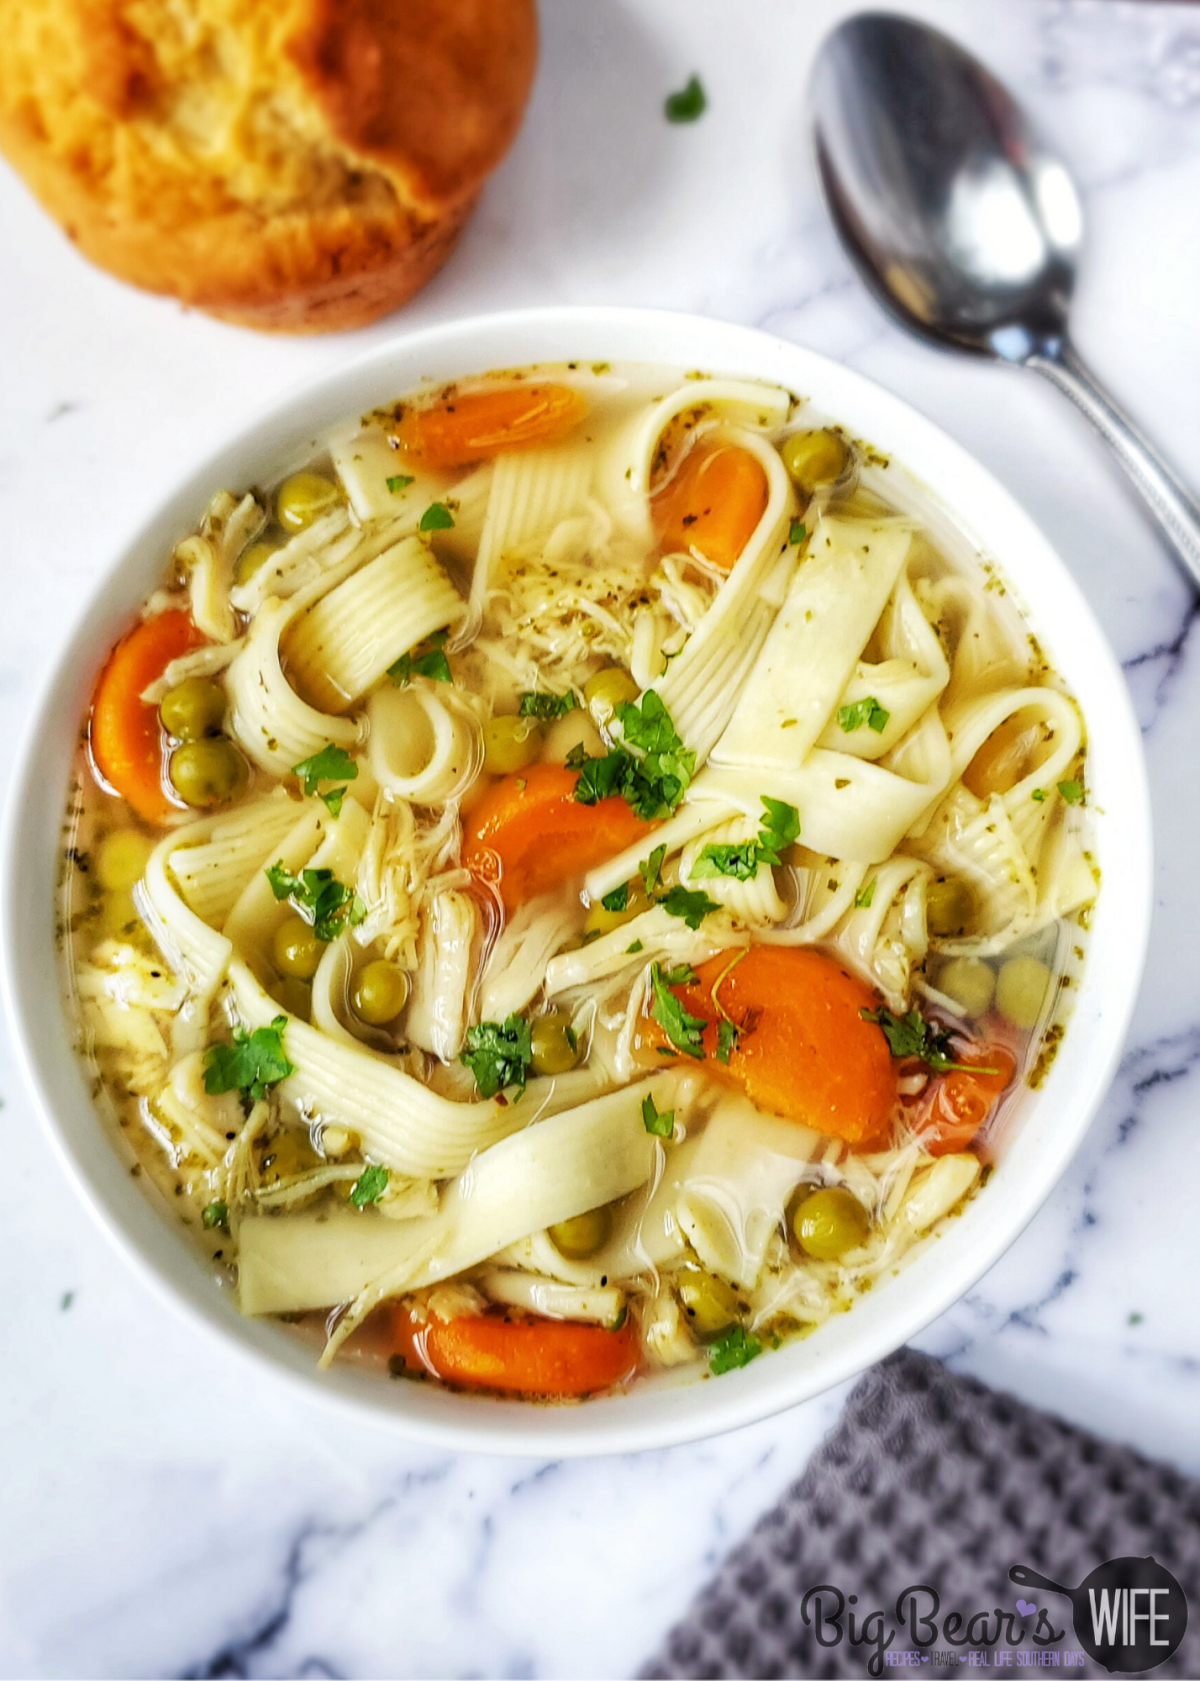 Classic Chicken Noodle Soup - The Whole Cook